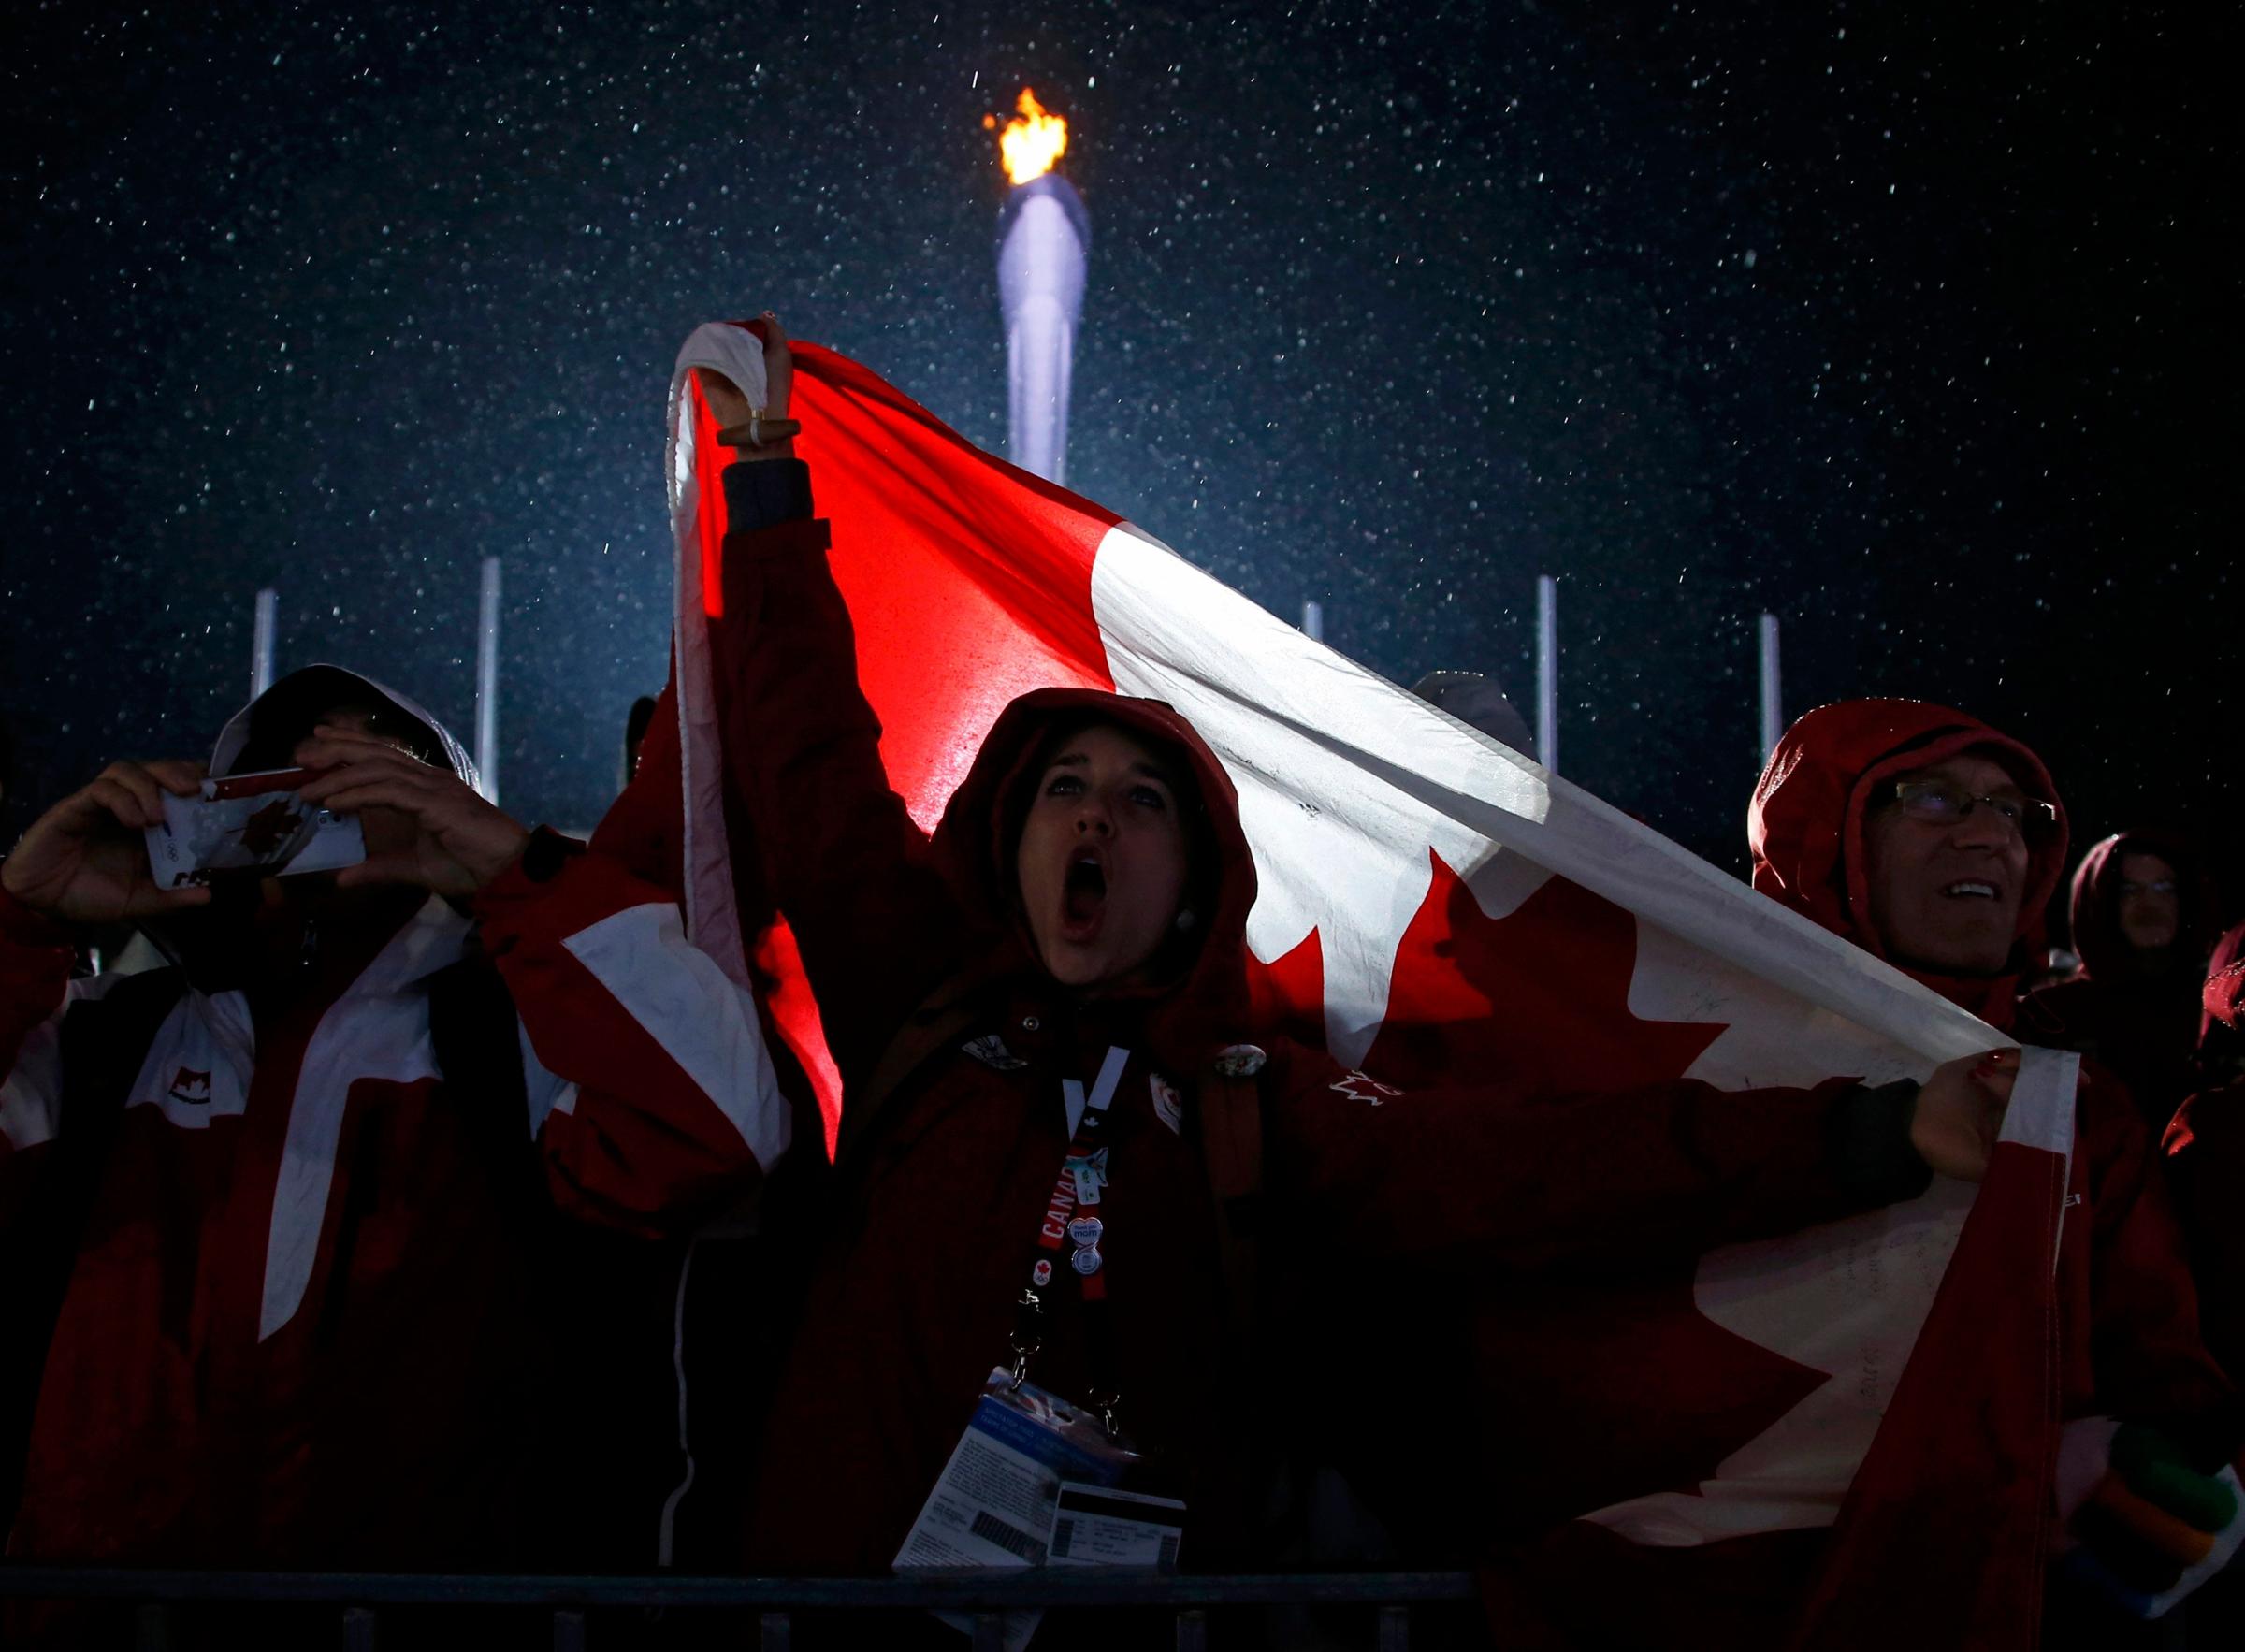 Canadian fans cheer during the medal ceremony.